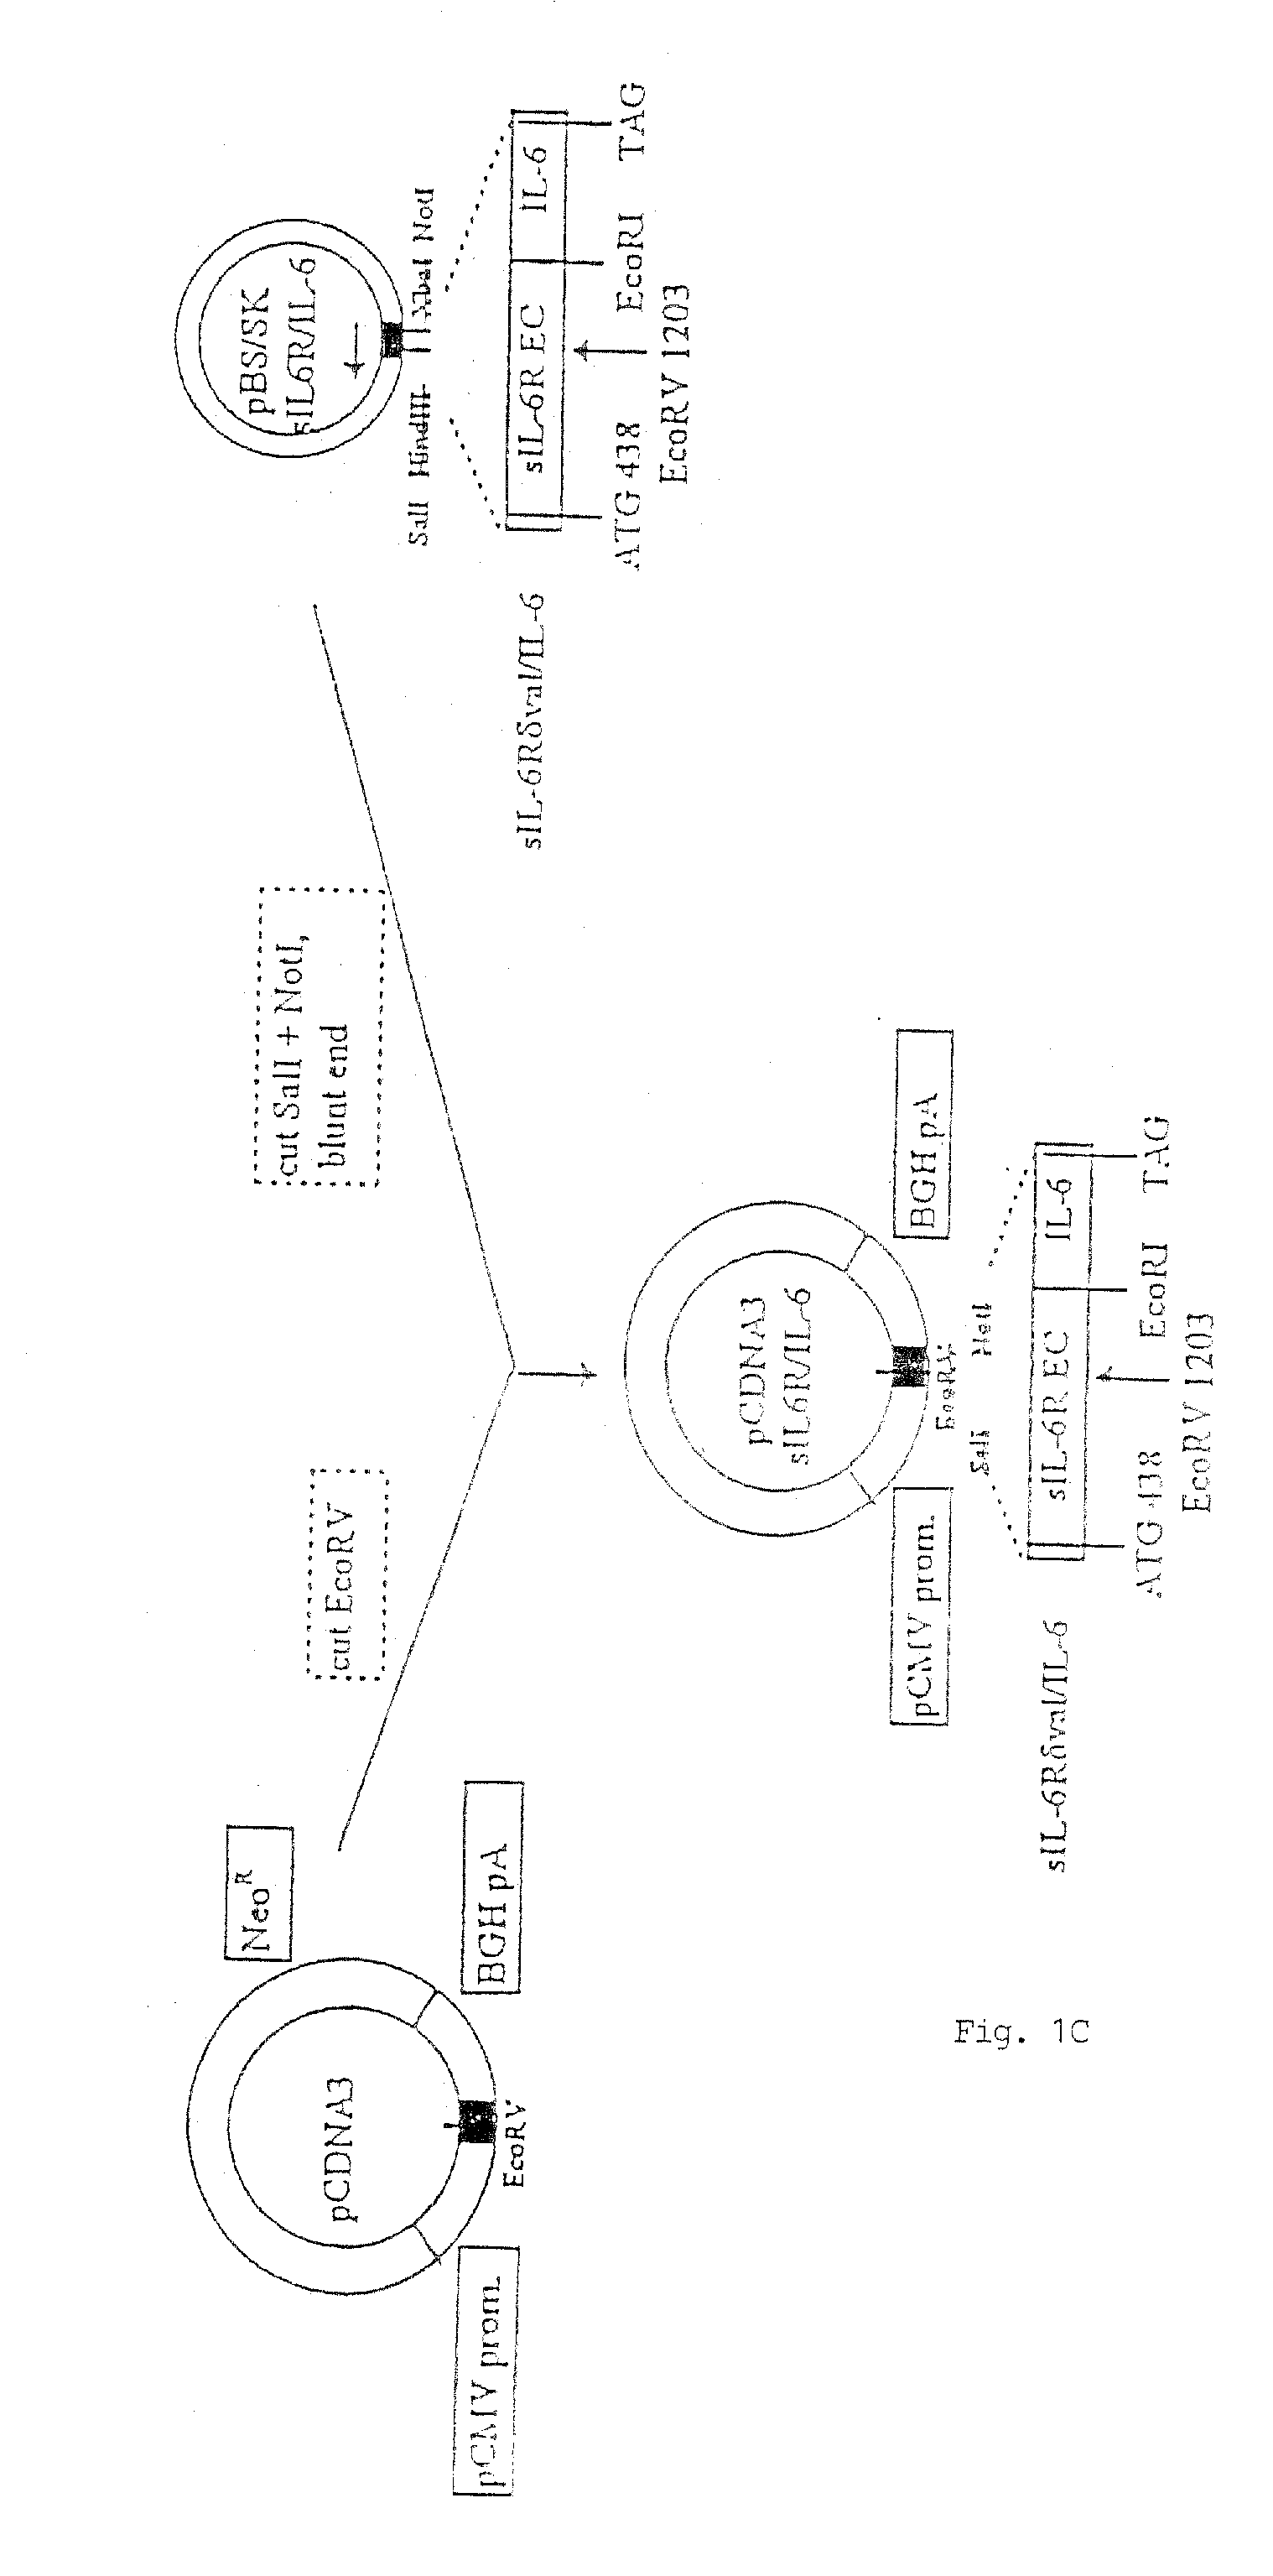 Chimeric Interleukin-6 Soluble Receptor/Ligand Protein, Analogs Thereof and Uses Thereof